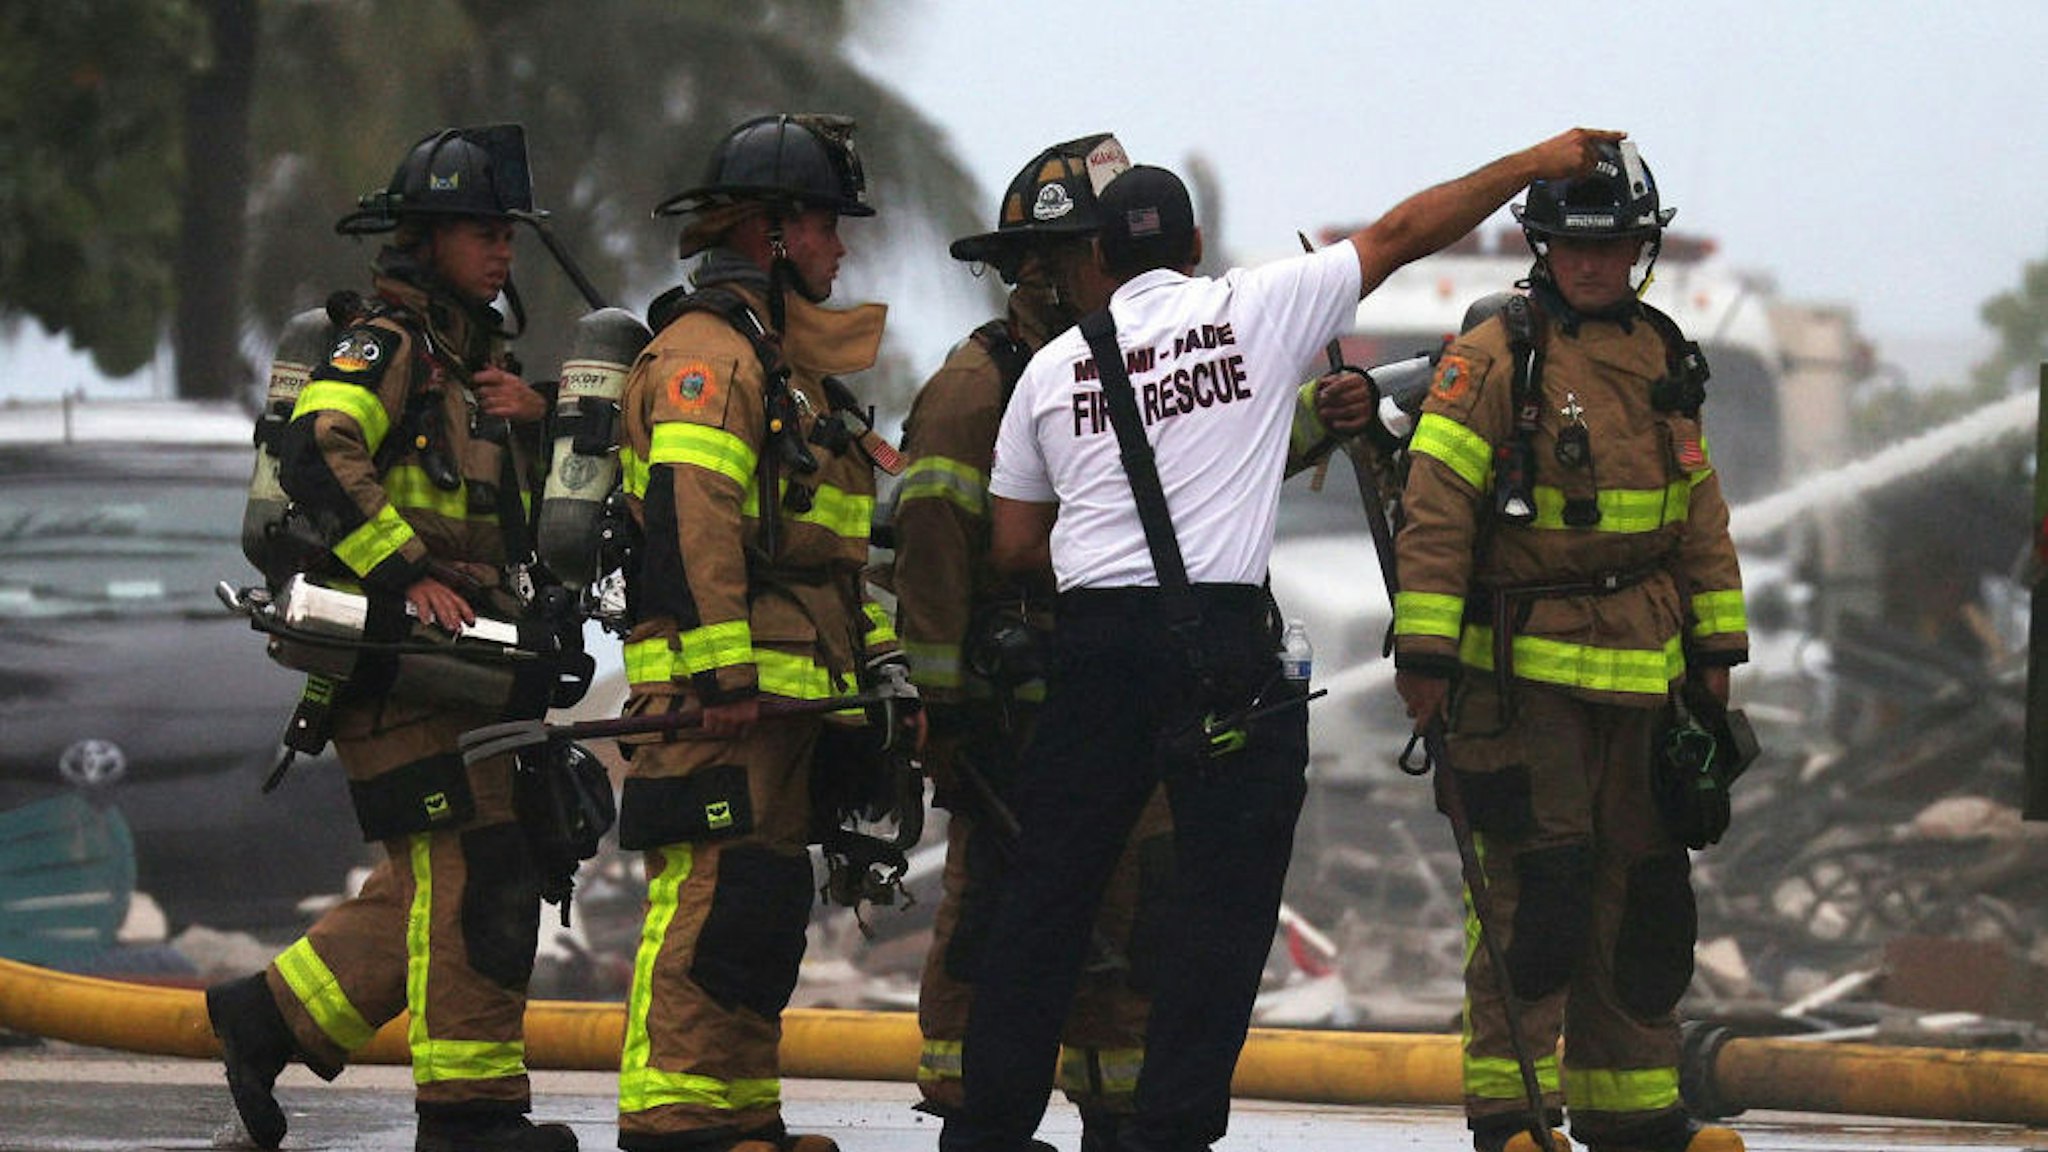 SURFSIDE, FLORIDA - JUNE 24: Miami-Dade Fire Rescue personnel continue search and rescue operations at the 12-story Champlain Towers South condo building that partially collapsed on June 24, 2021 in Surfside, Florida. It is unknown at this time how many people were injured as search-and-rescue effort continues with rescue crews from across Miami-Dade and Broward counties. According to reports, almost 100 people are still unaccounted for.